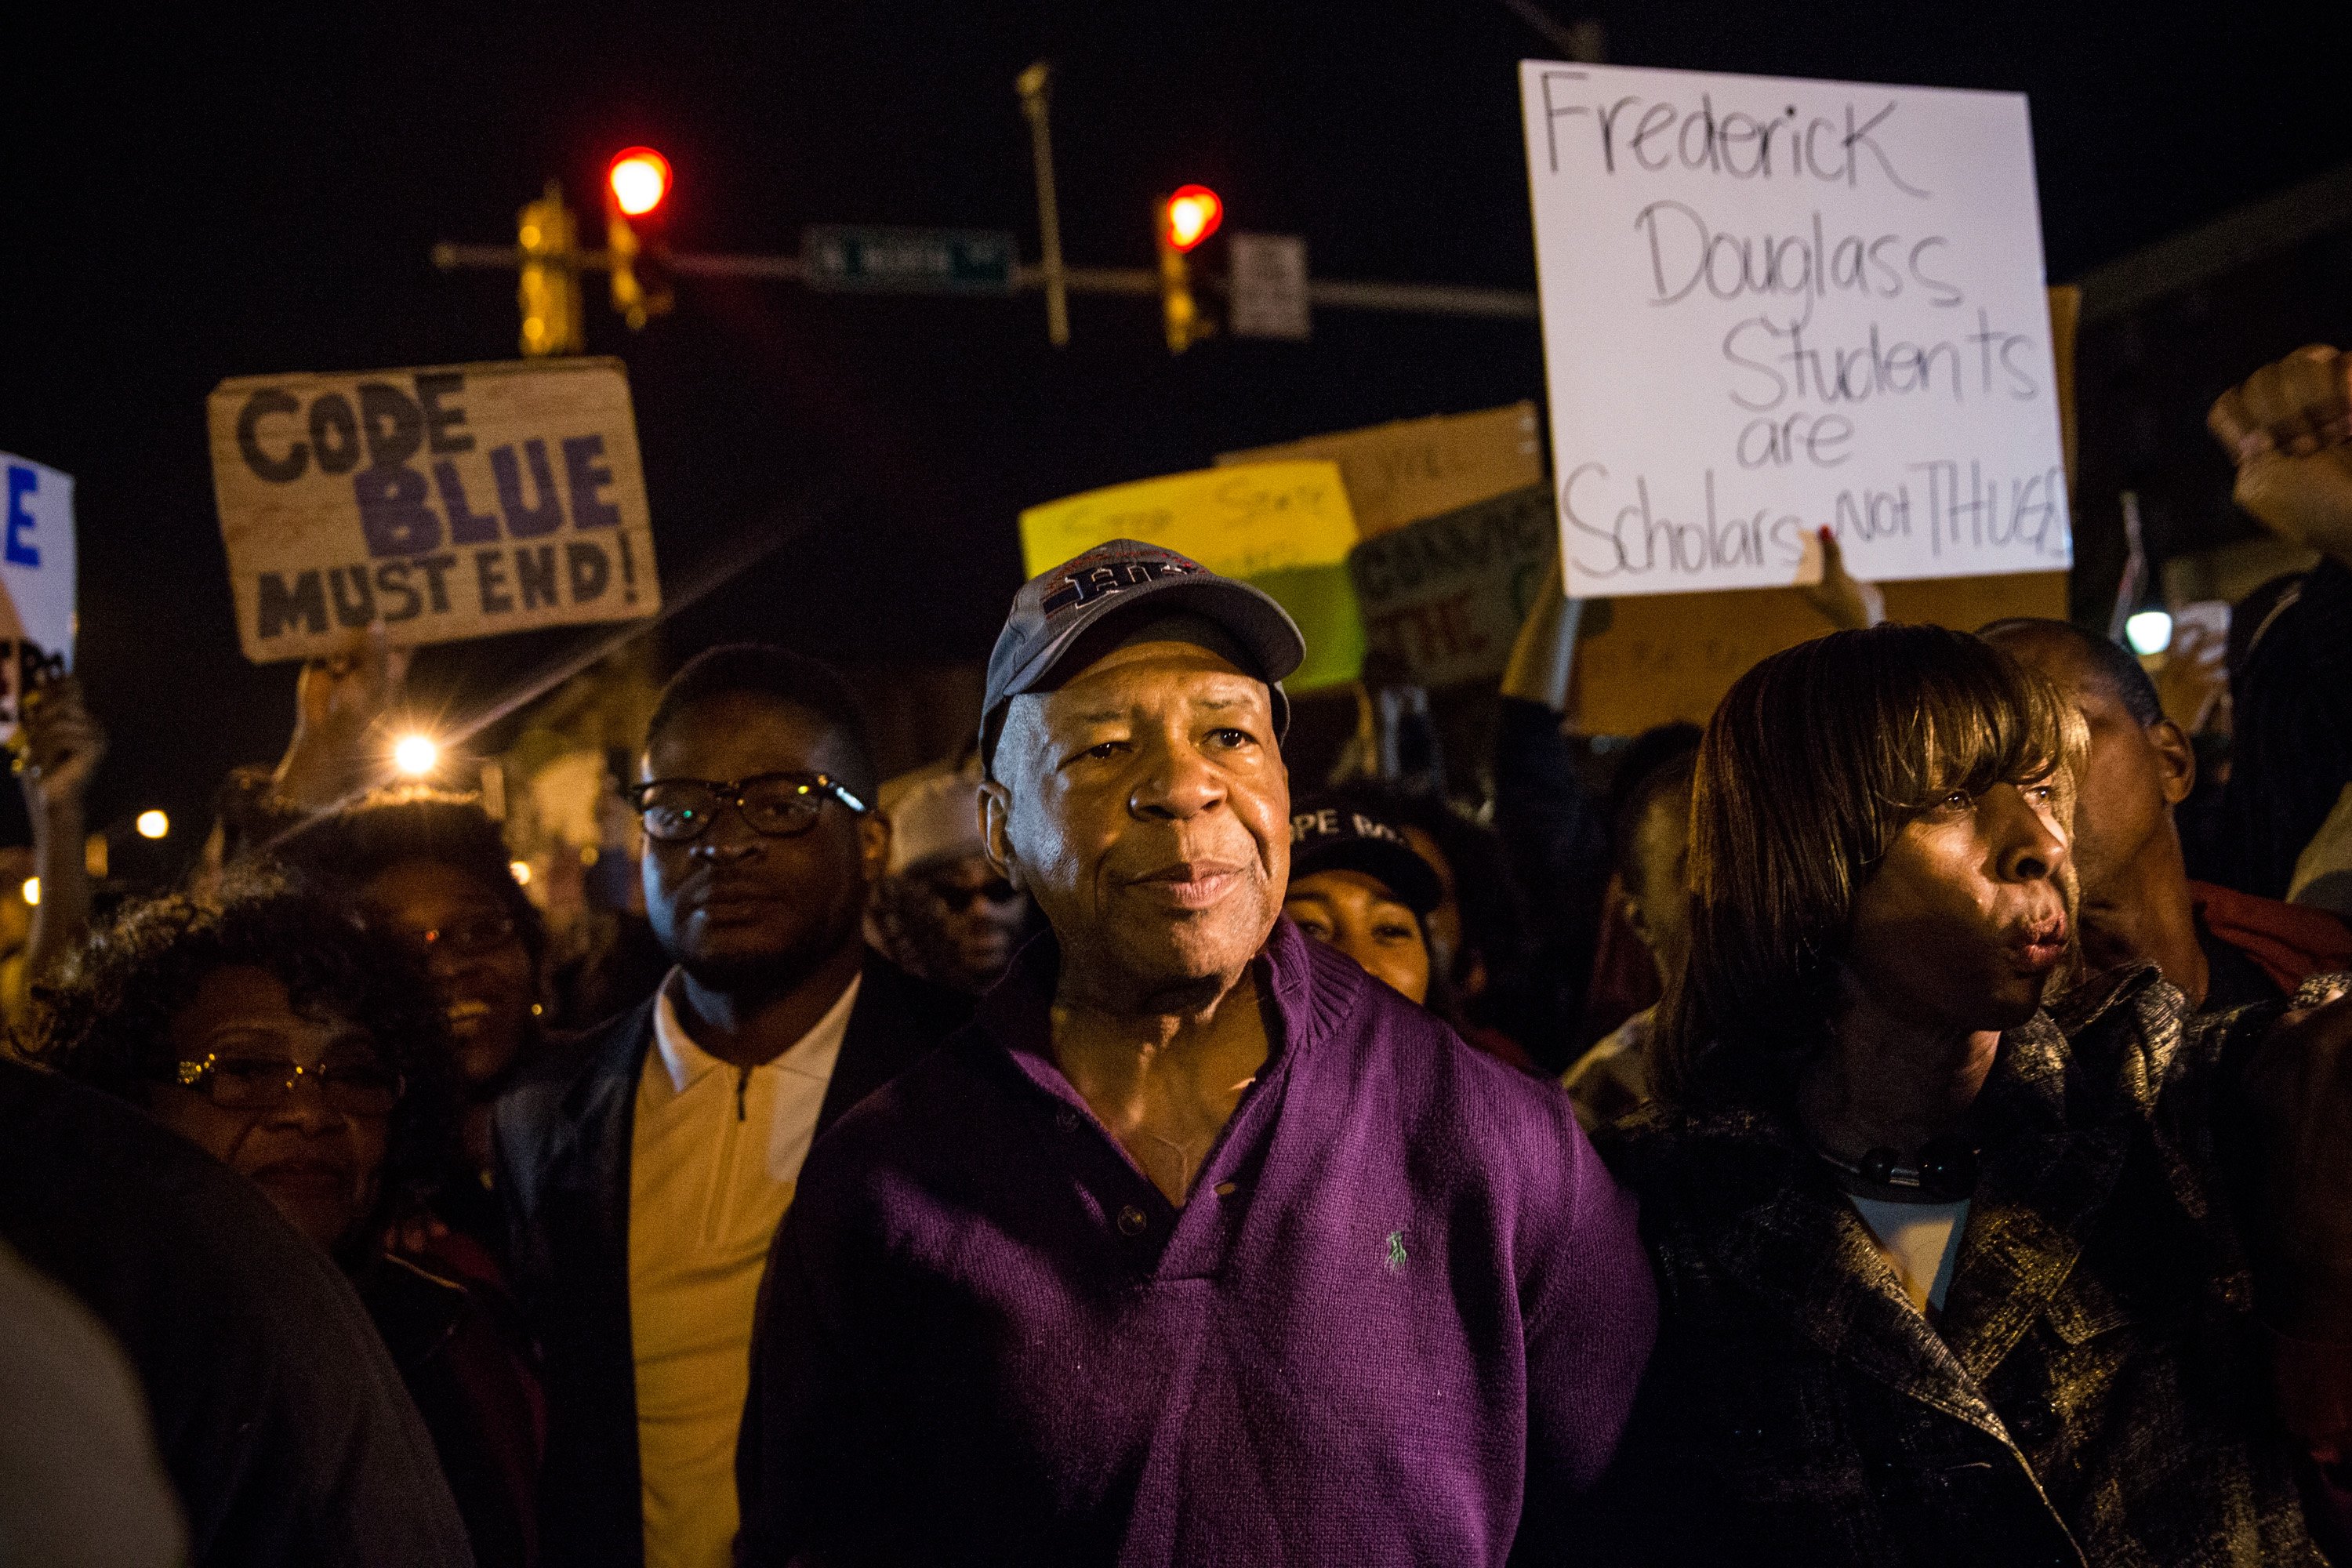 Rep. Elijah Cummings (D-MD) helps clear the streets of protesters on the same day that Maryland state attorney Marilyn J Mosby announced that charges would be filed against Baltimore police officers in the death of Freddie Gray on May 1, 2015 in Baltimore, Maryland. (Andrew Burton/Getty Images)